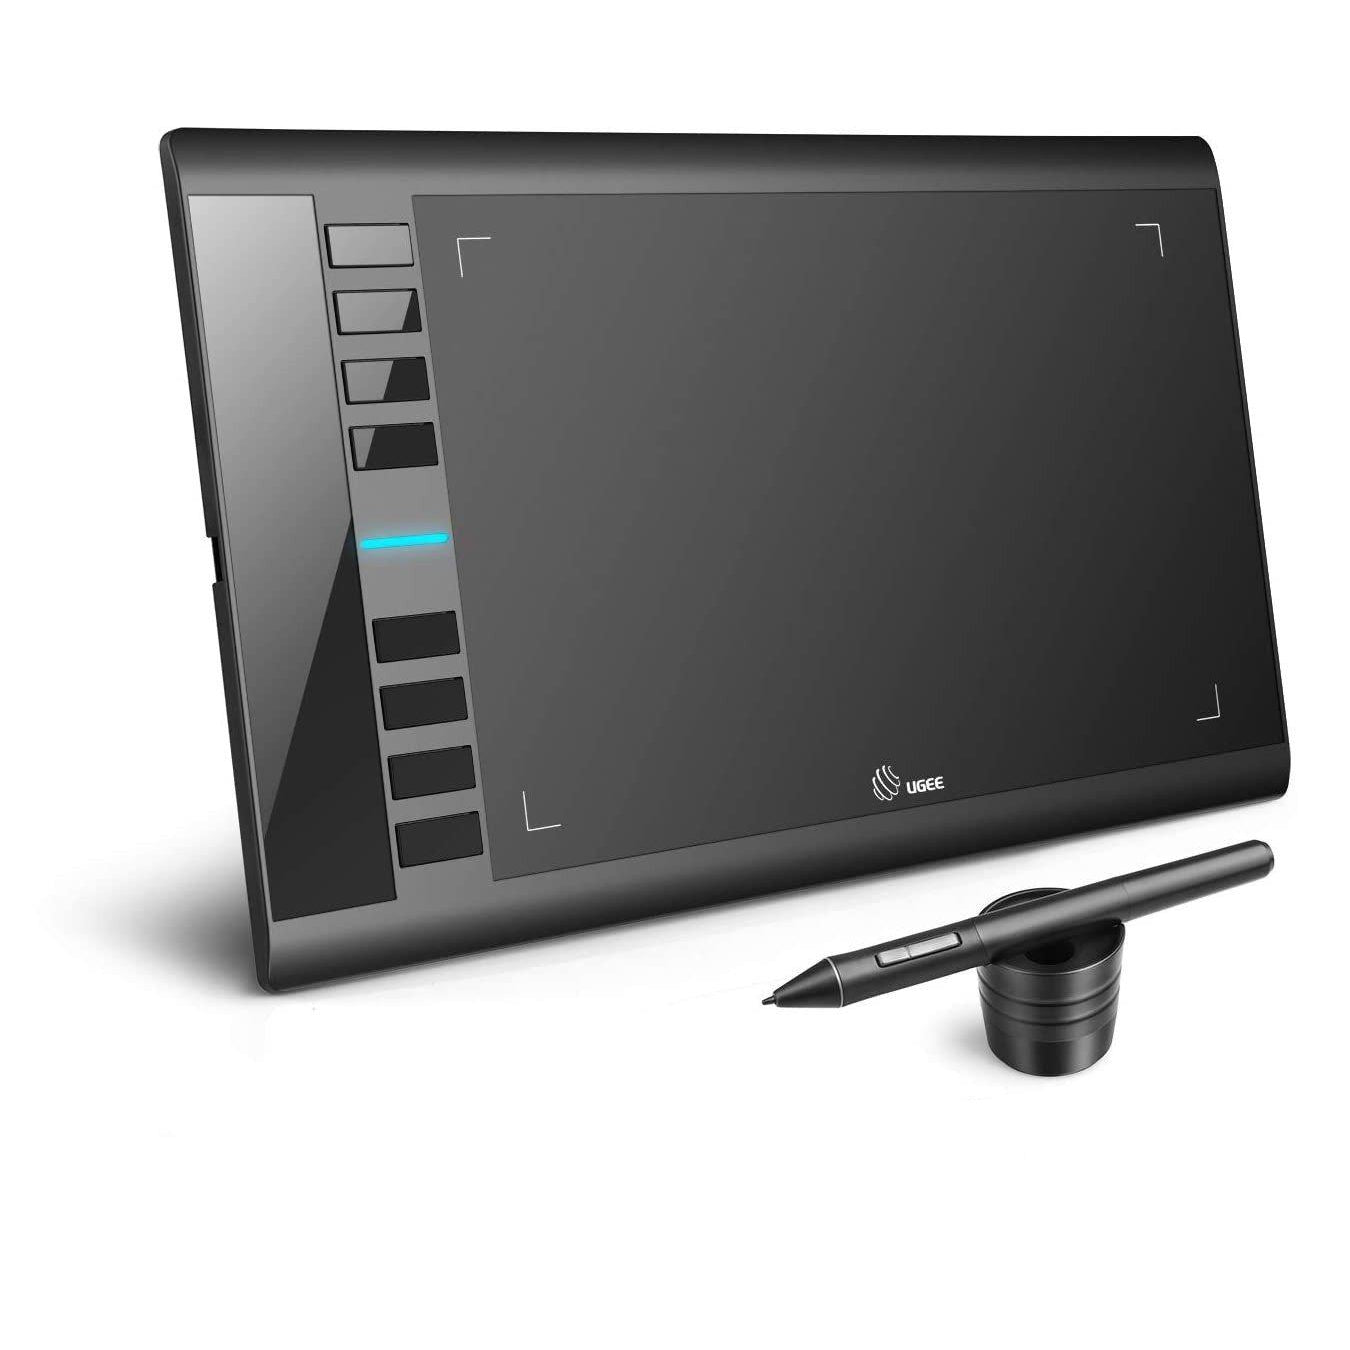 Ugee M708 Graphics Tablet,10 x 6 inch Digital Drawing Tablet with Battery-Free Stylus